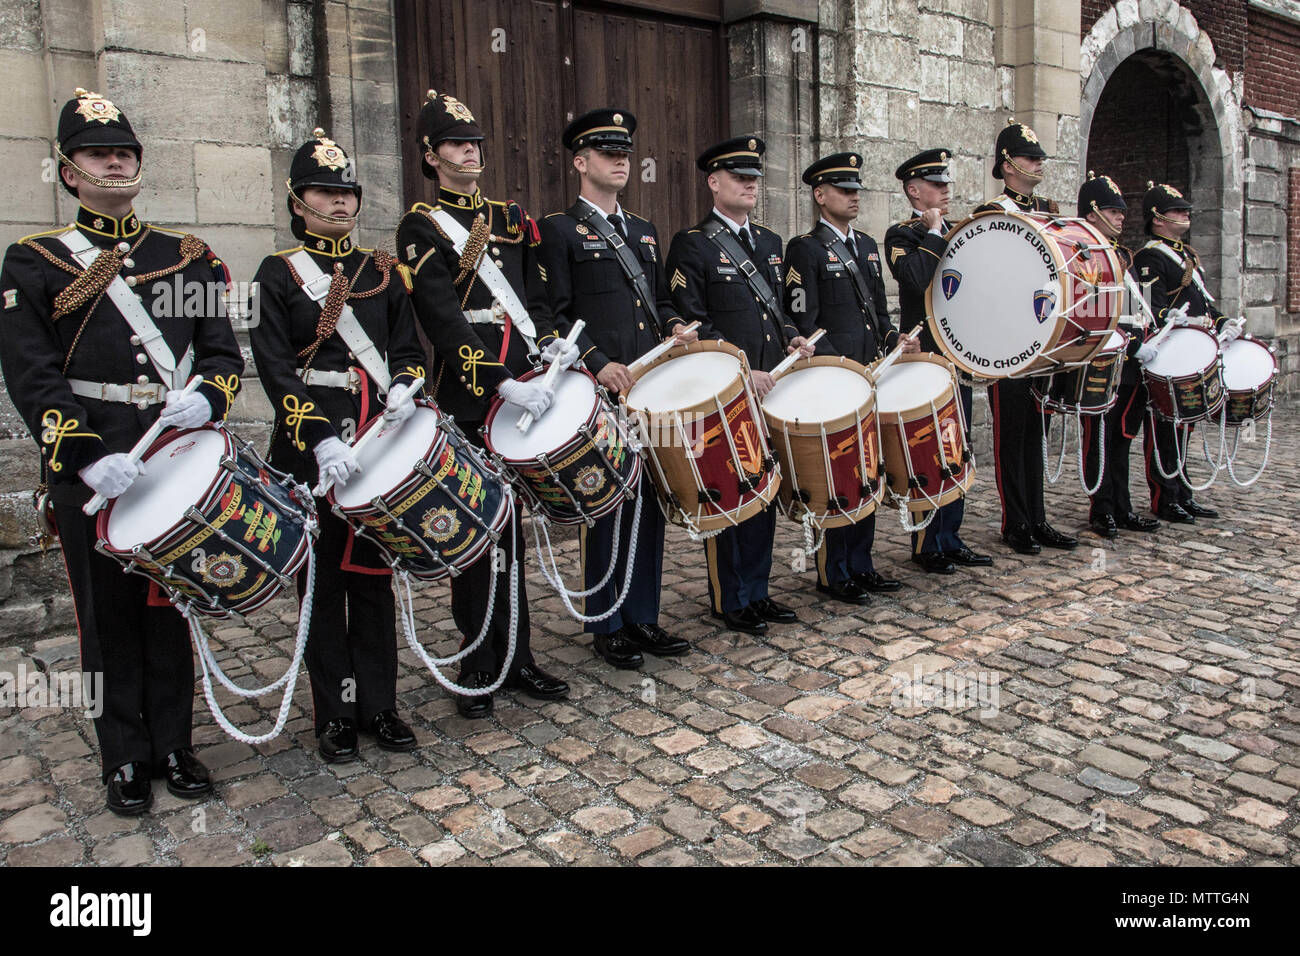 US Army Europe Band drummers stand alongside the drummers of the Royal Logistics Corps at the Citadelle 350 anniversary military show, May 25, 2018, Lille, France.  US Army photo by Sgt. Joseph Agacinski/released. Stock Photo